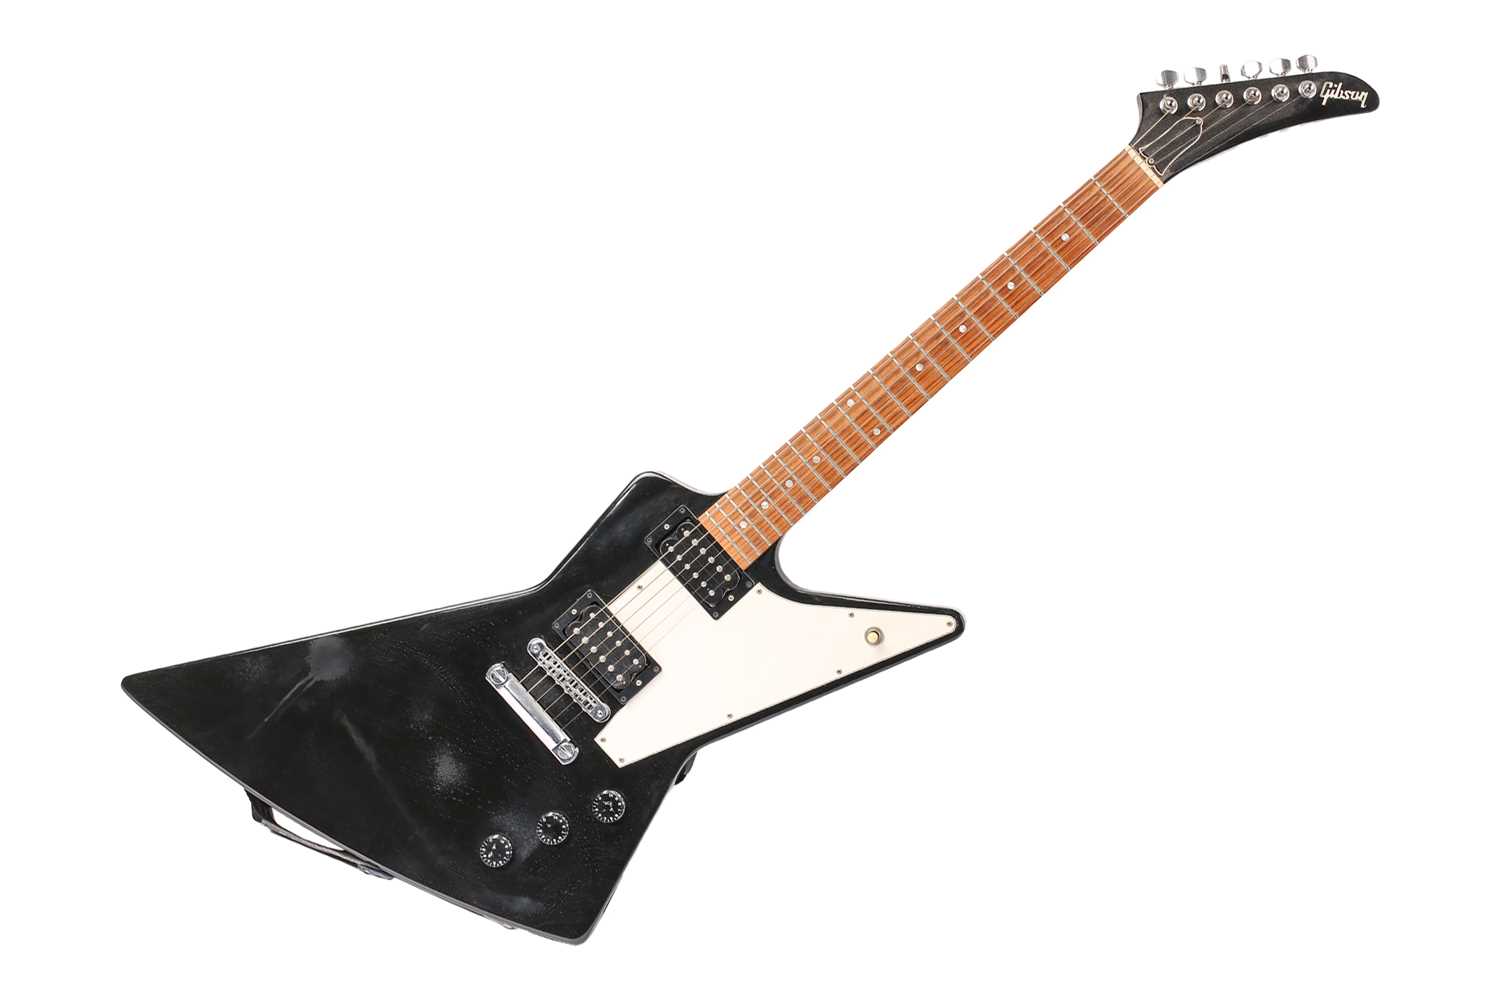 Lot 377 - A 1990s Gibson Explorer electric guitar, in